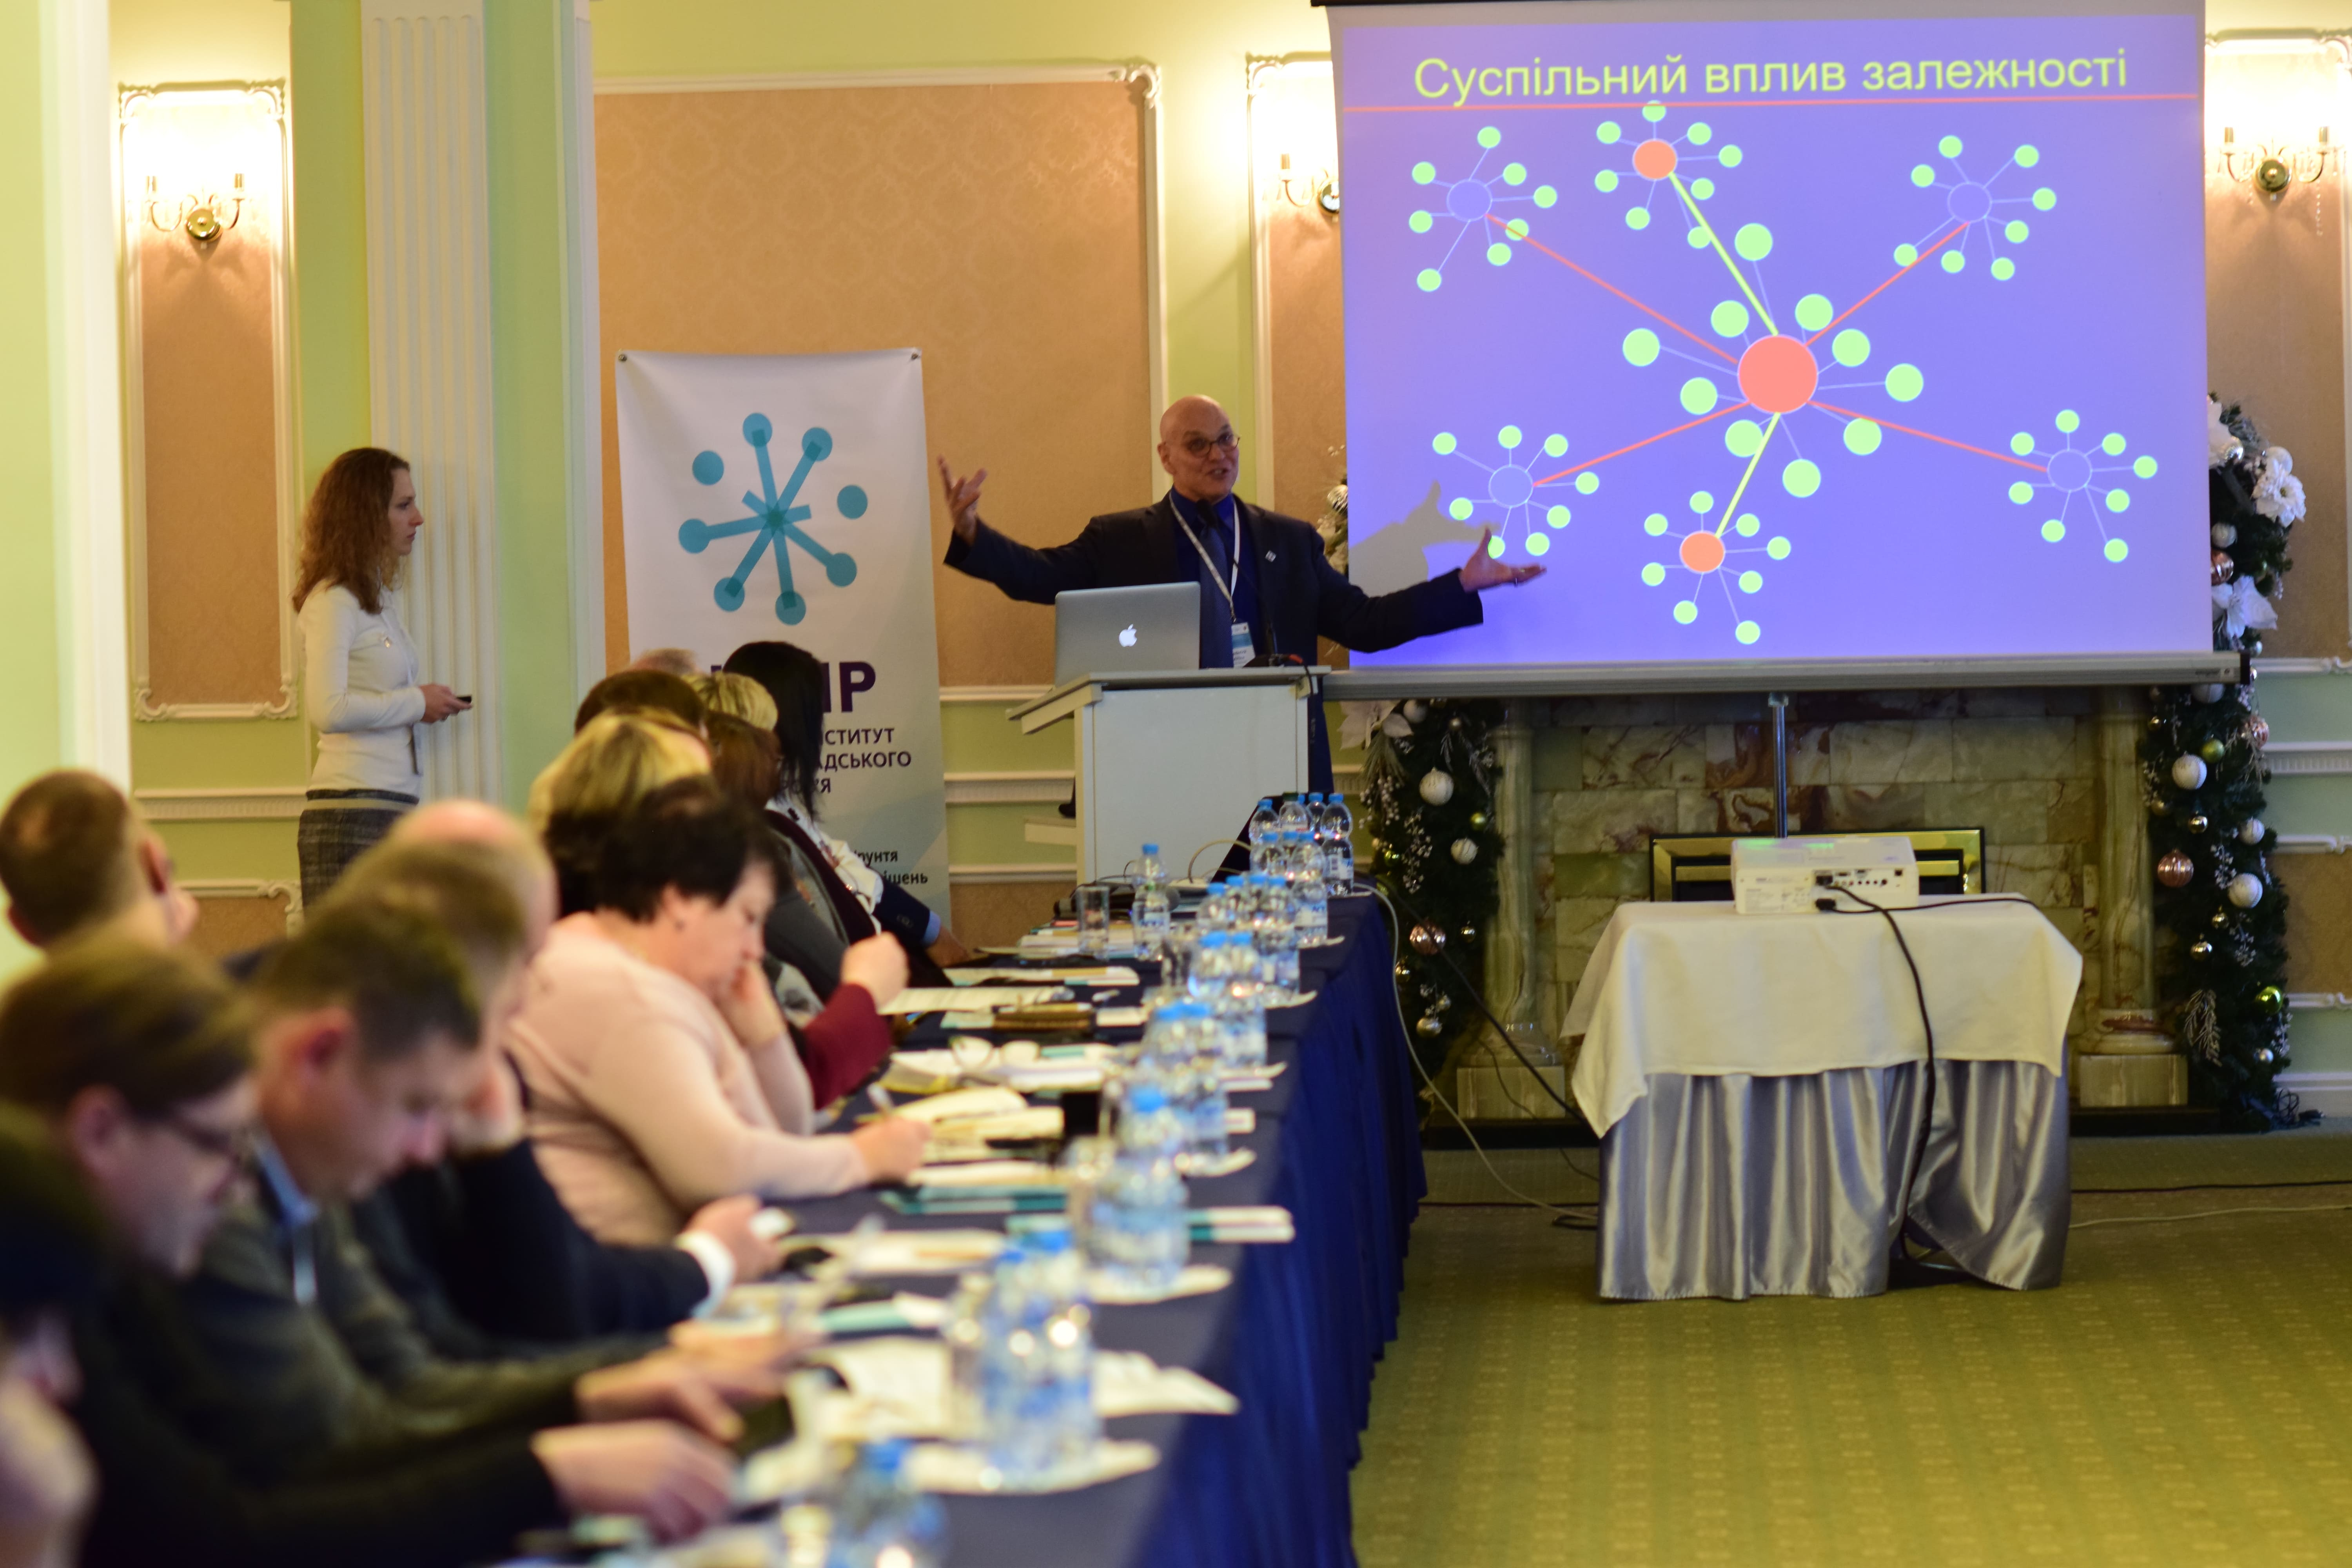 National Meeting “Problems of Public Health and the HIV Epidemic in Ukraine”